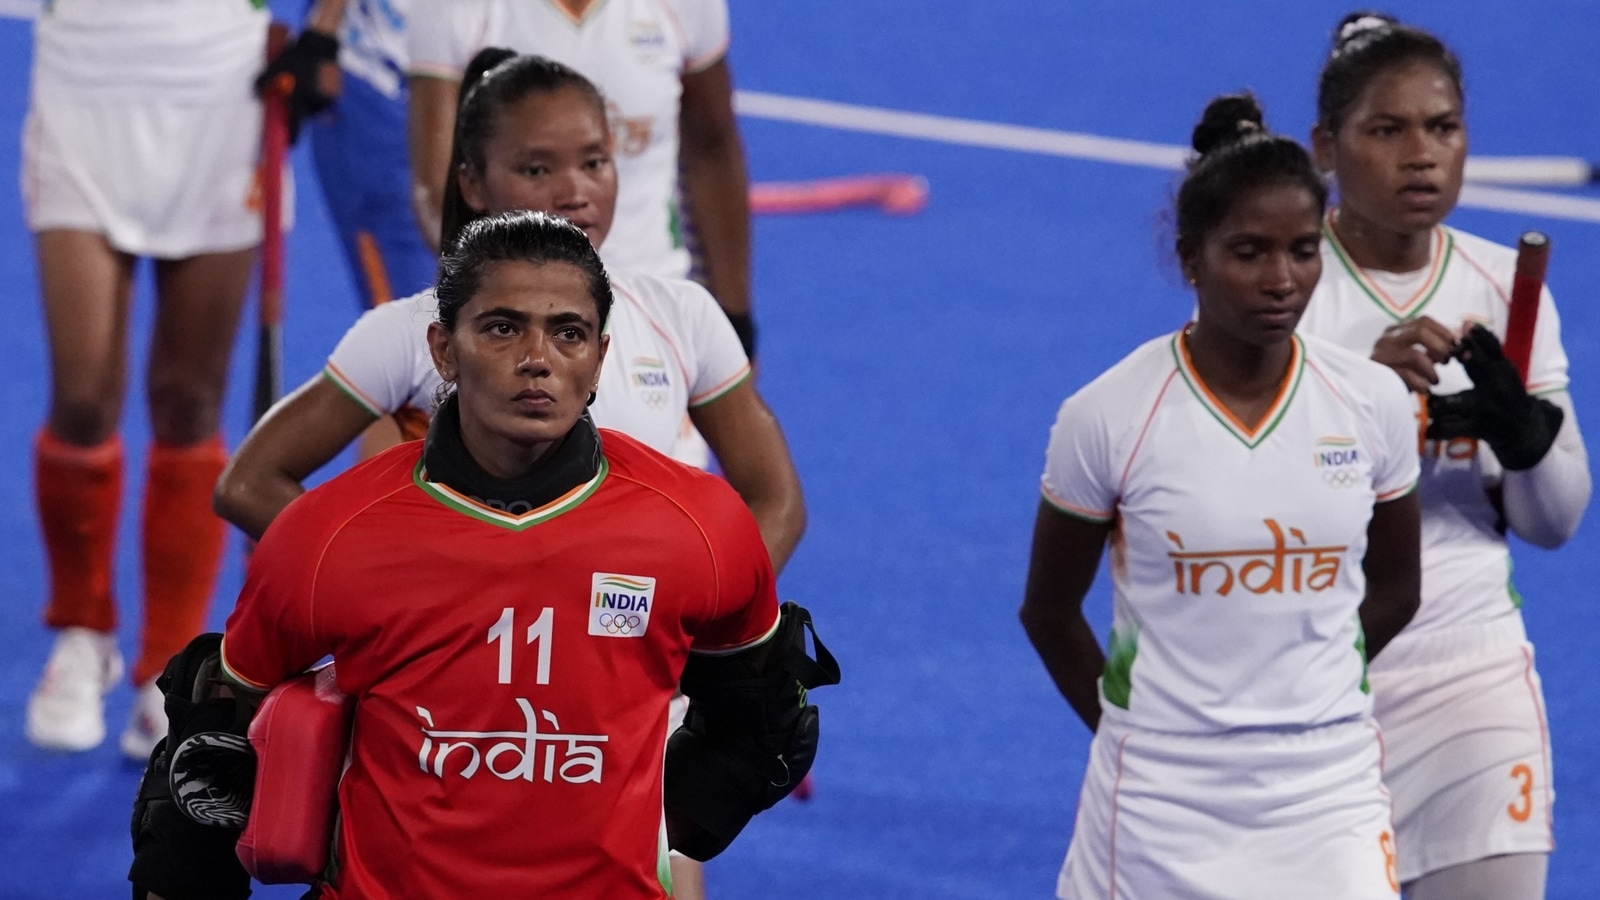 India vs Argentina, Tokyo Olympics, Women Hockey Semi-final: Match Preview,  Key Players And Head-to-Head Record - News18